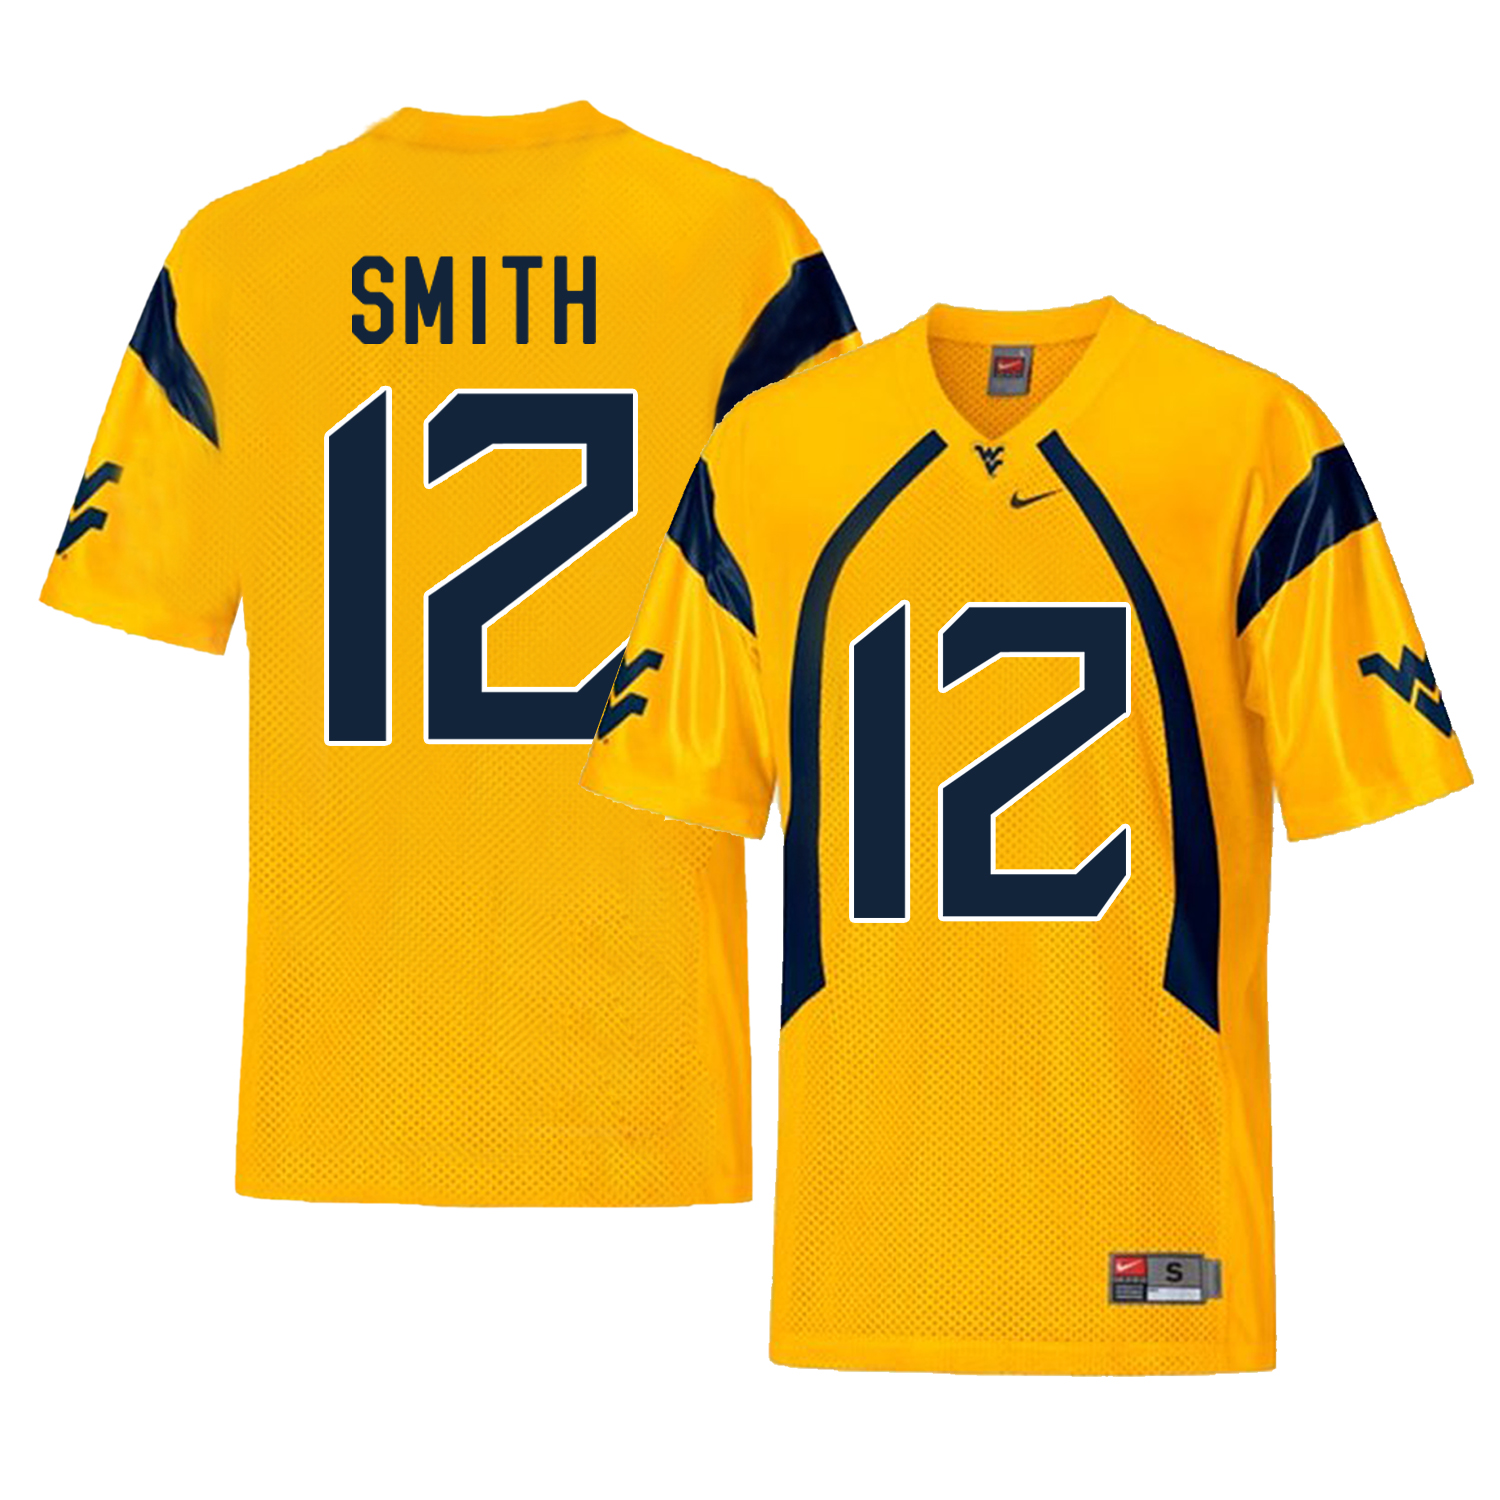 West Virginia Mountaineers 12 Geno Smith Gold College Football Jersey